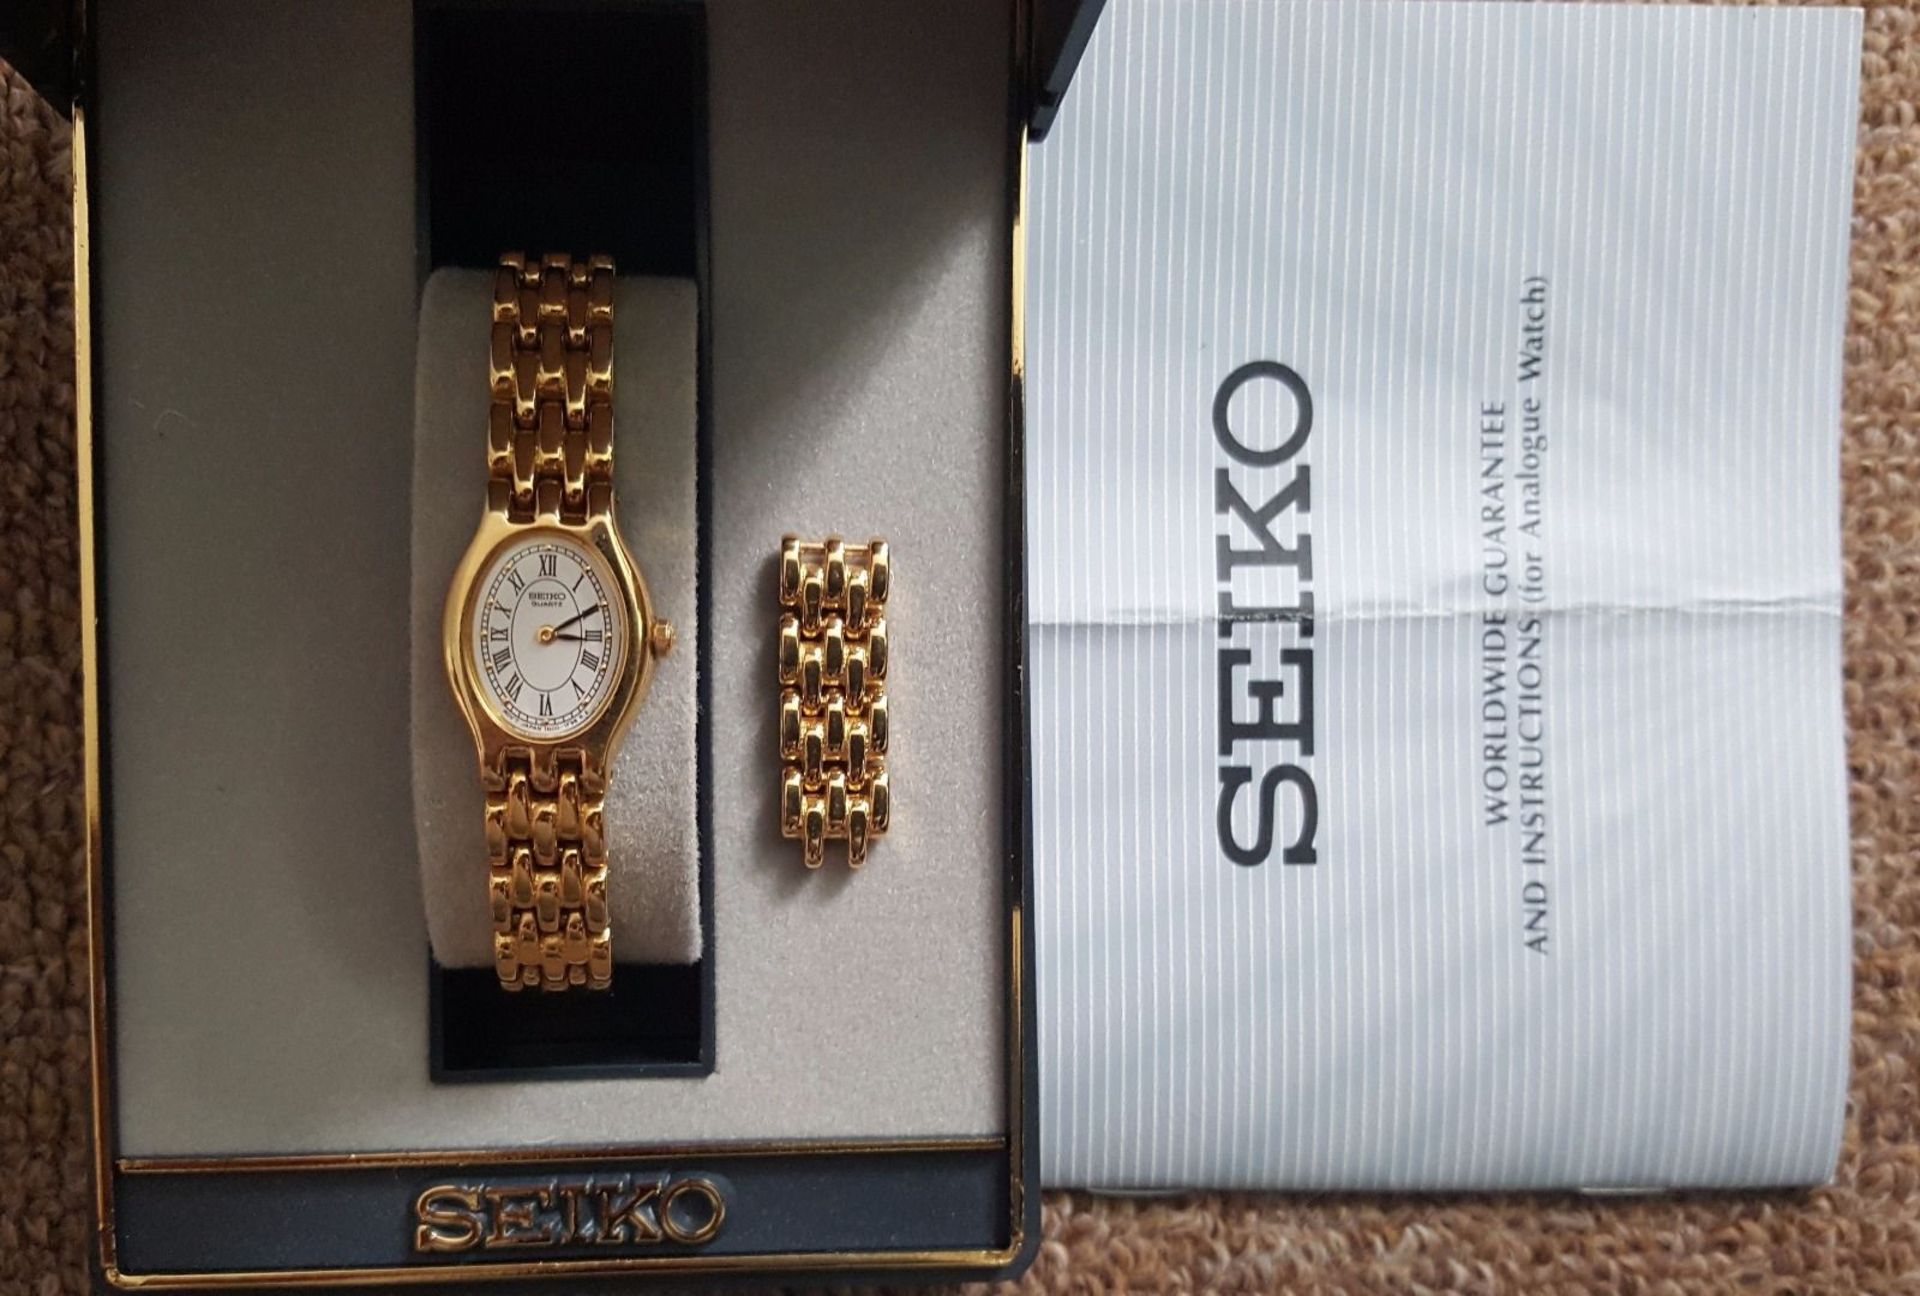 SEIKO WATCH   GOOD CONDITION, MINOR MARKS   1st CLASS RECORDED DELIVERY £9.99 - Bild 2 aus 5